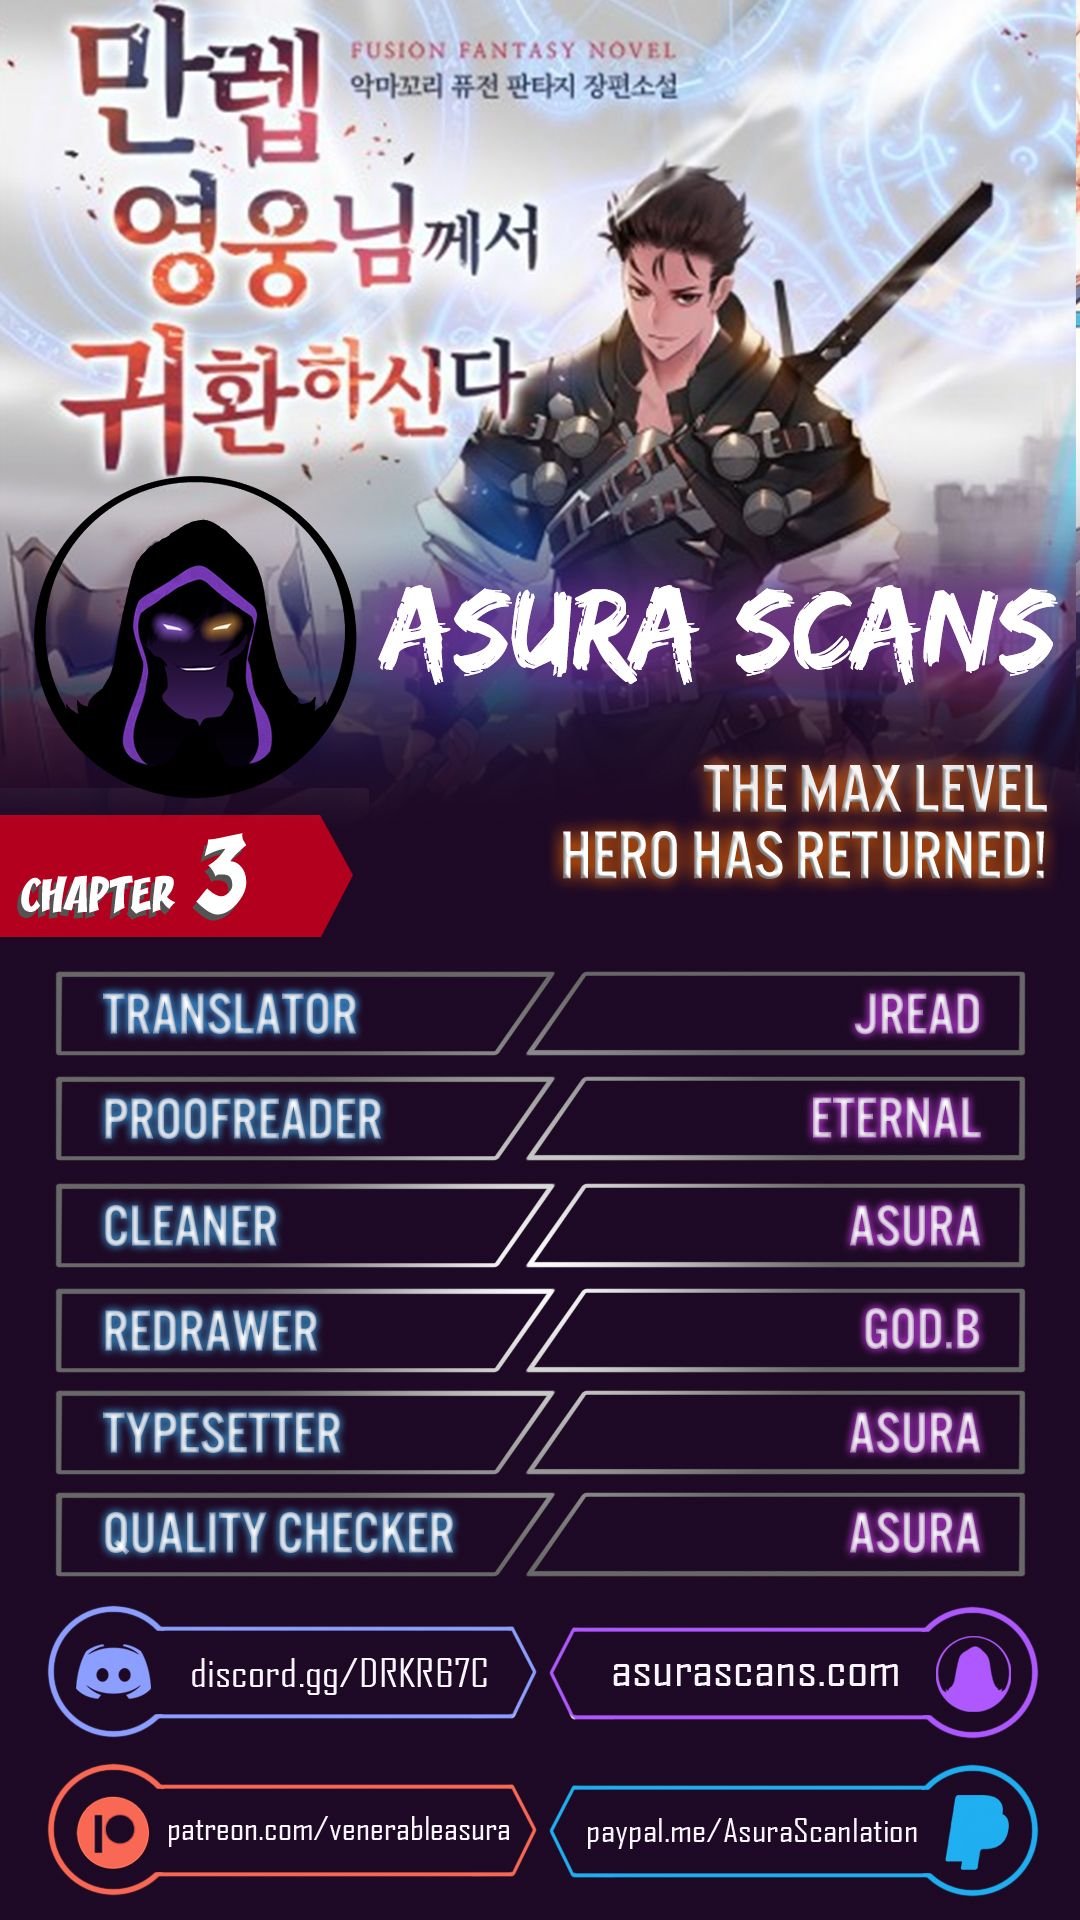 The MAX leveled hero will return! Chapter 3